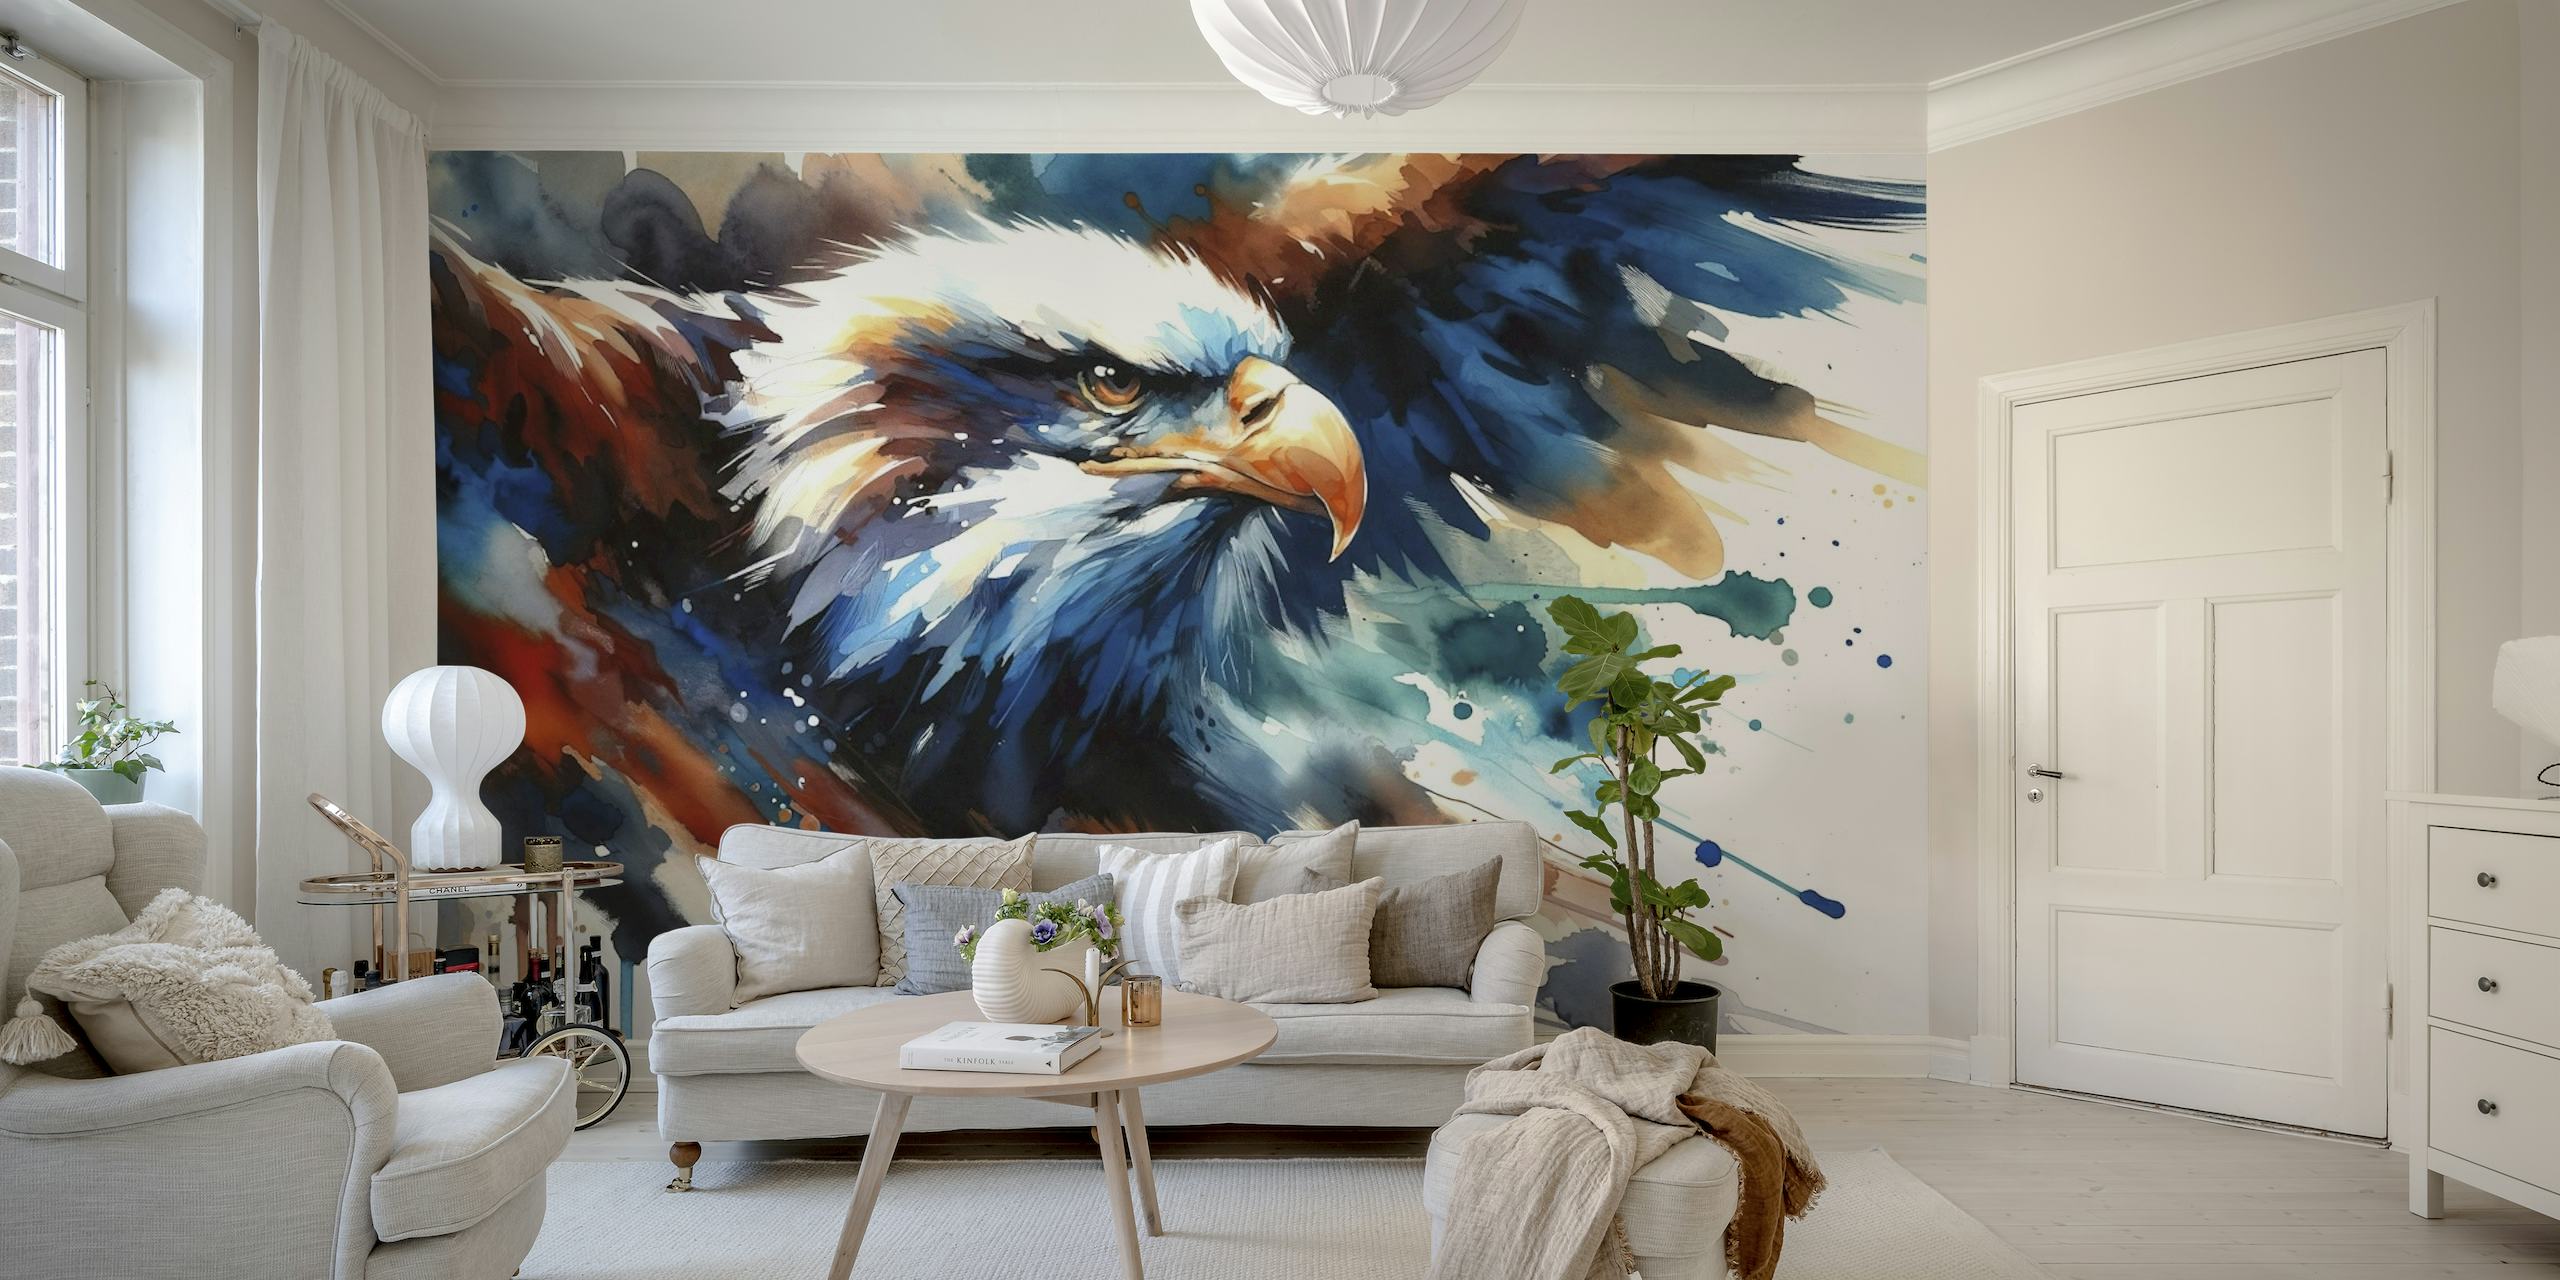 Soaring Majesty of the Eagle wallpaper